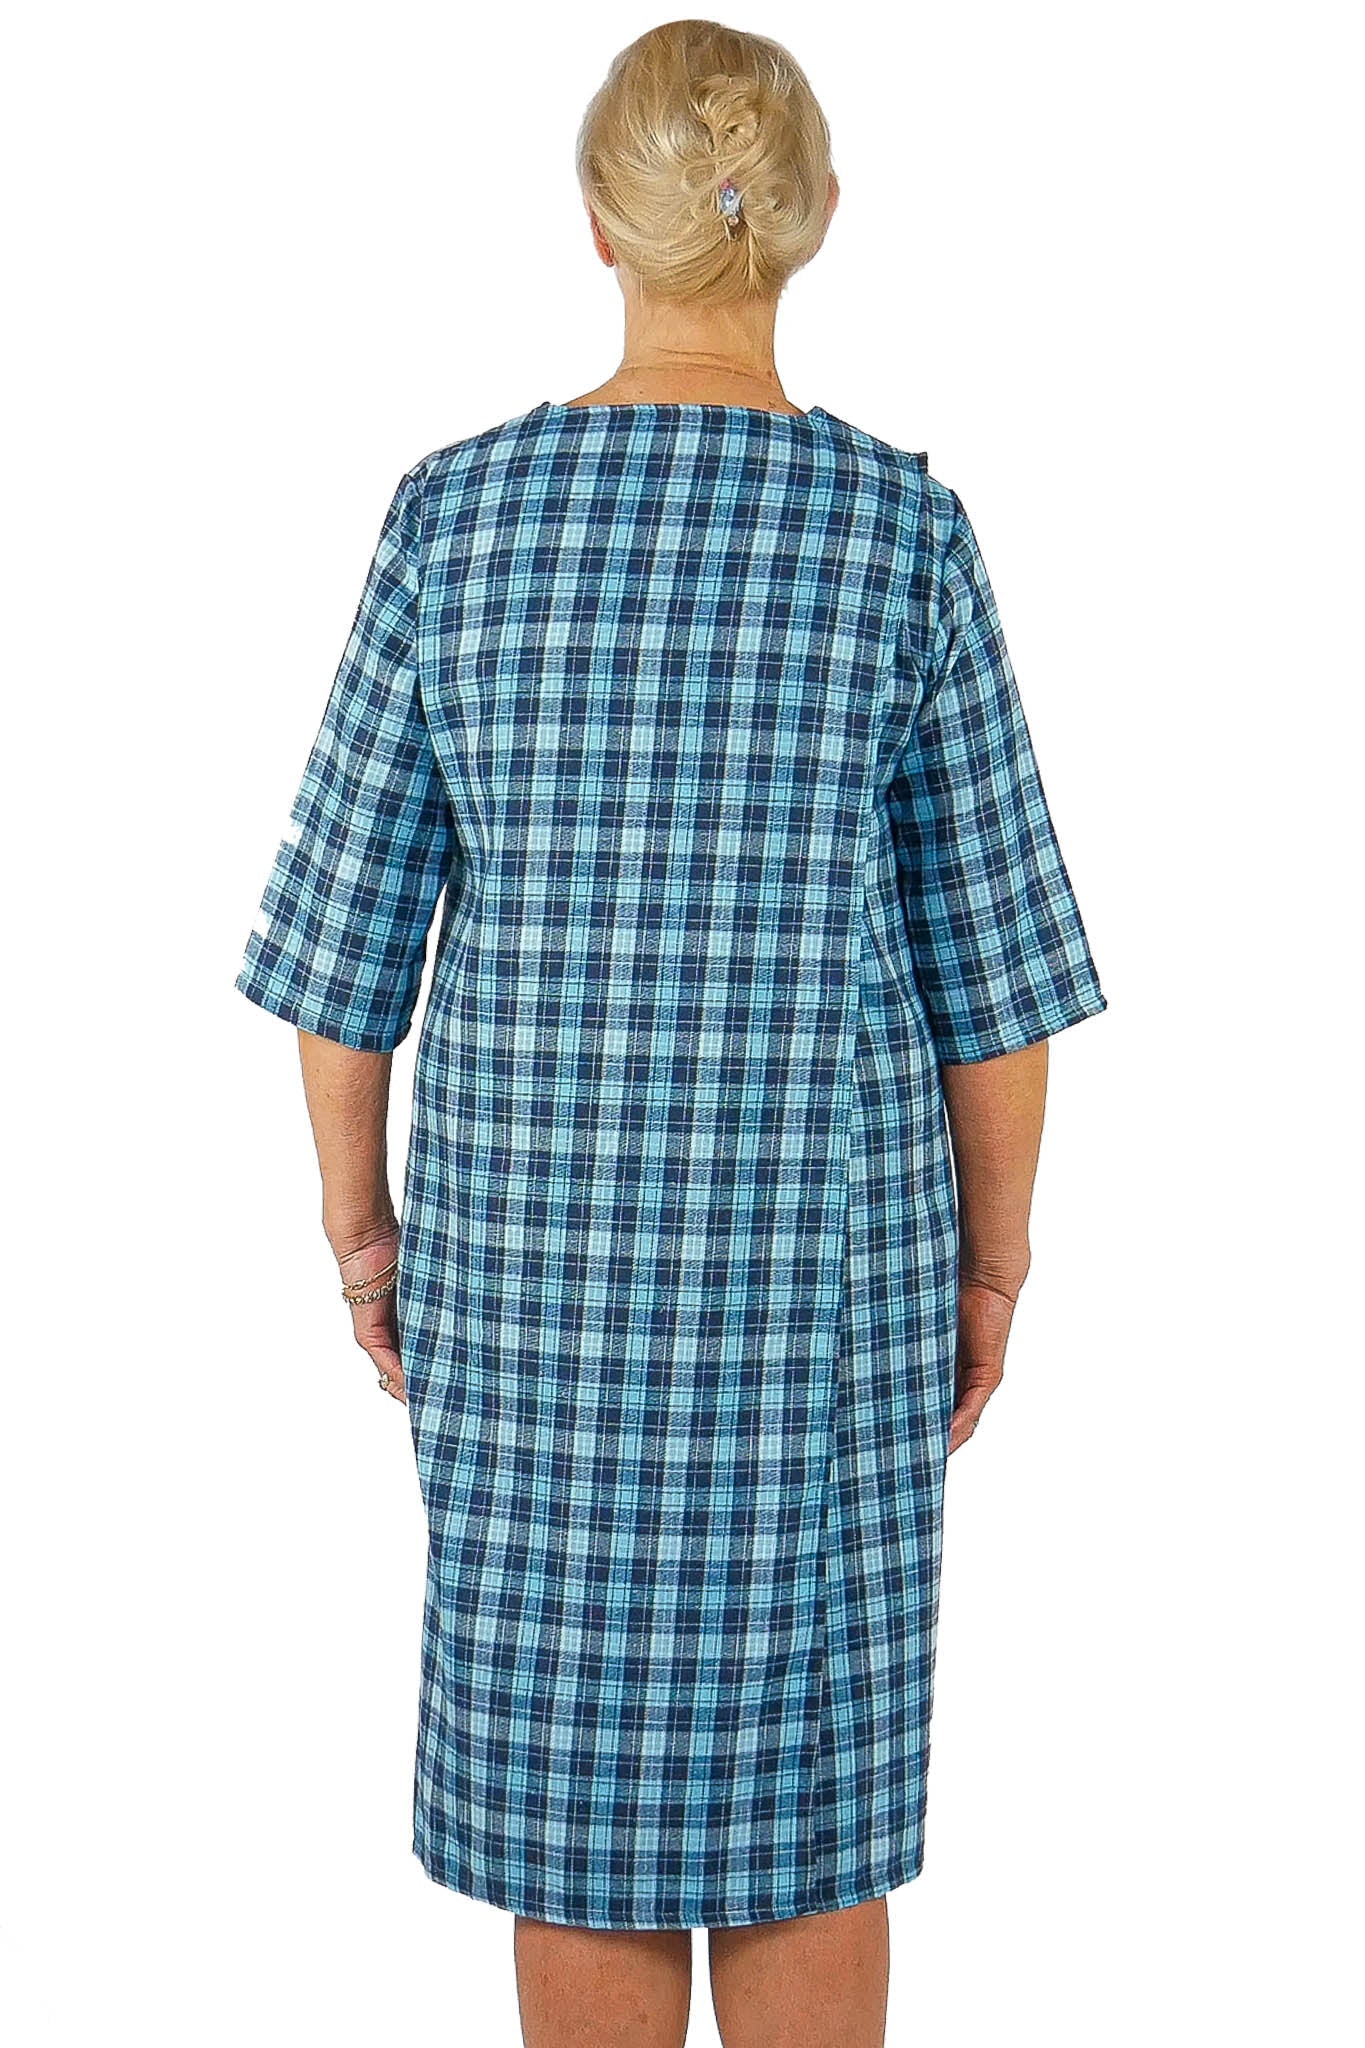 Cotton Nightgowns for Elderly | Art in Aging